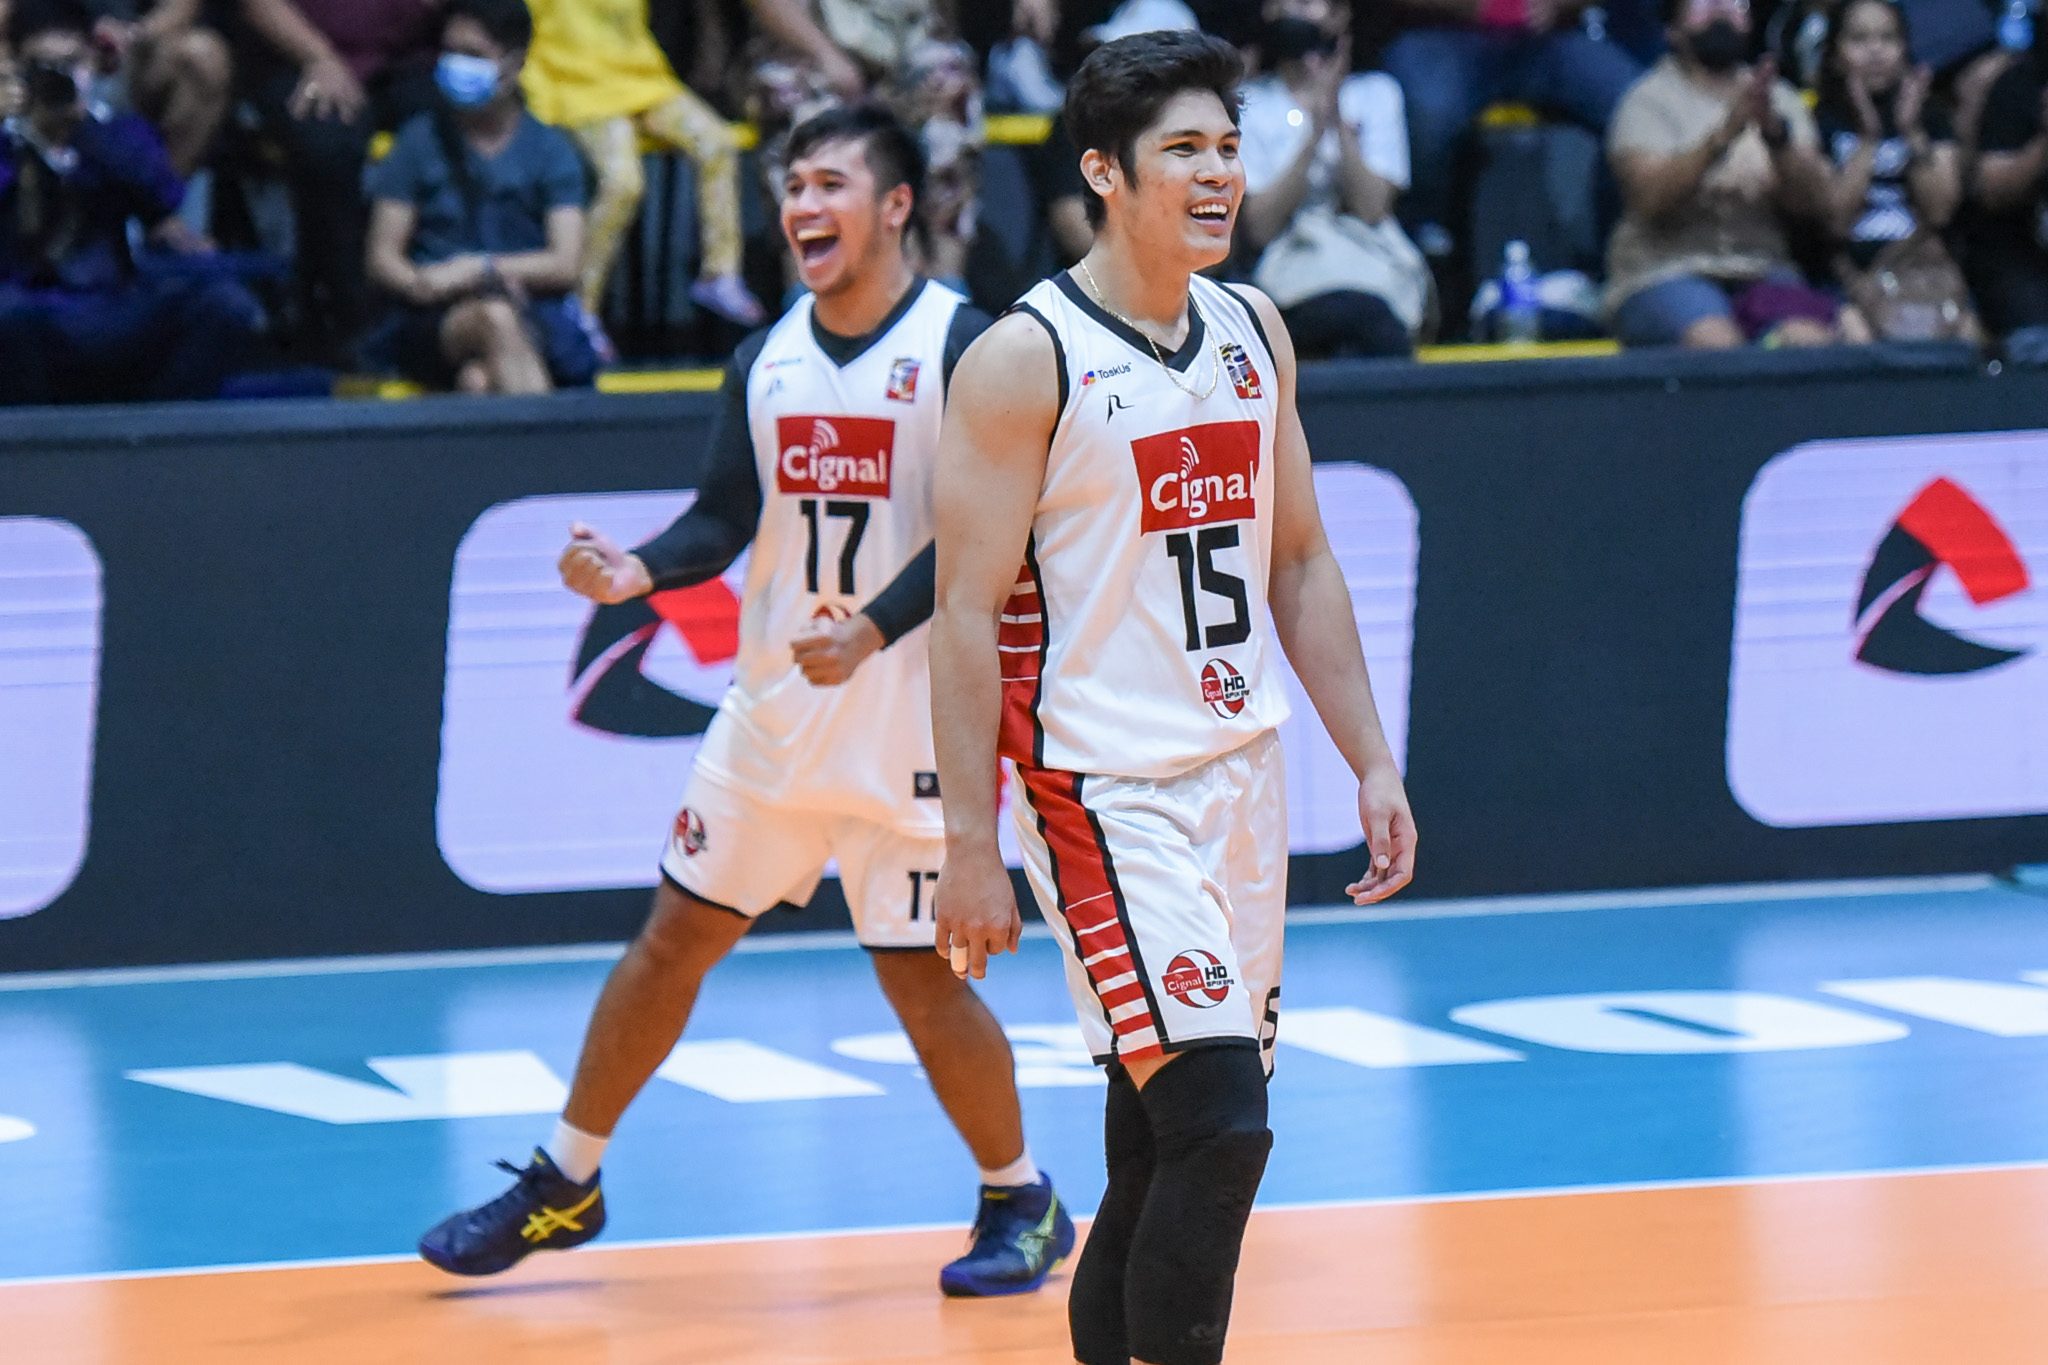 NU sweeps Spikers’ Turf semis, challenges Cignal for Open Conference title